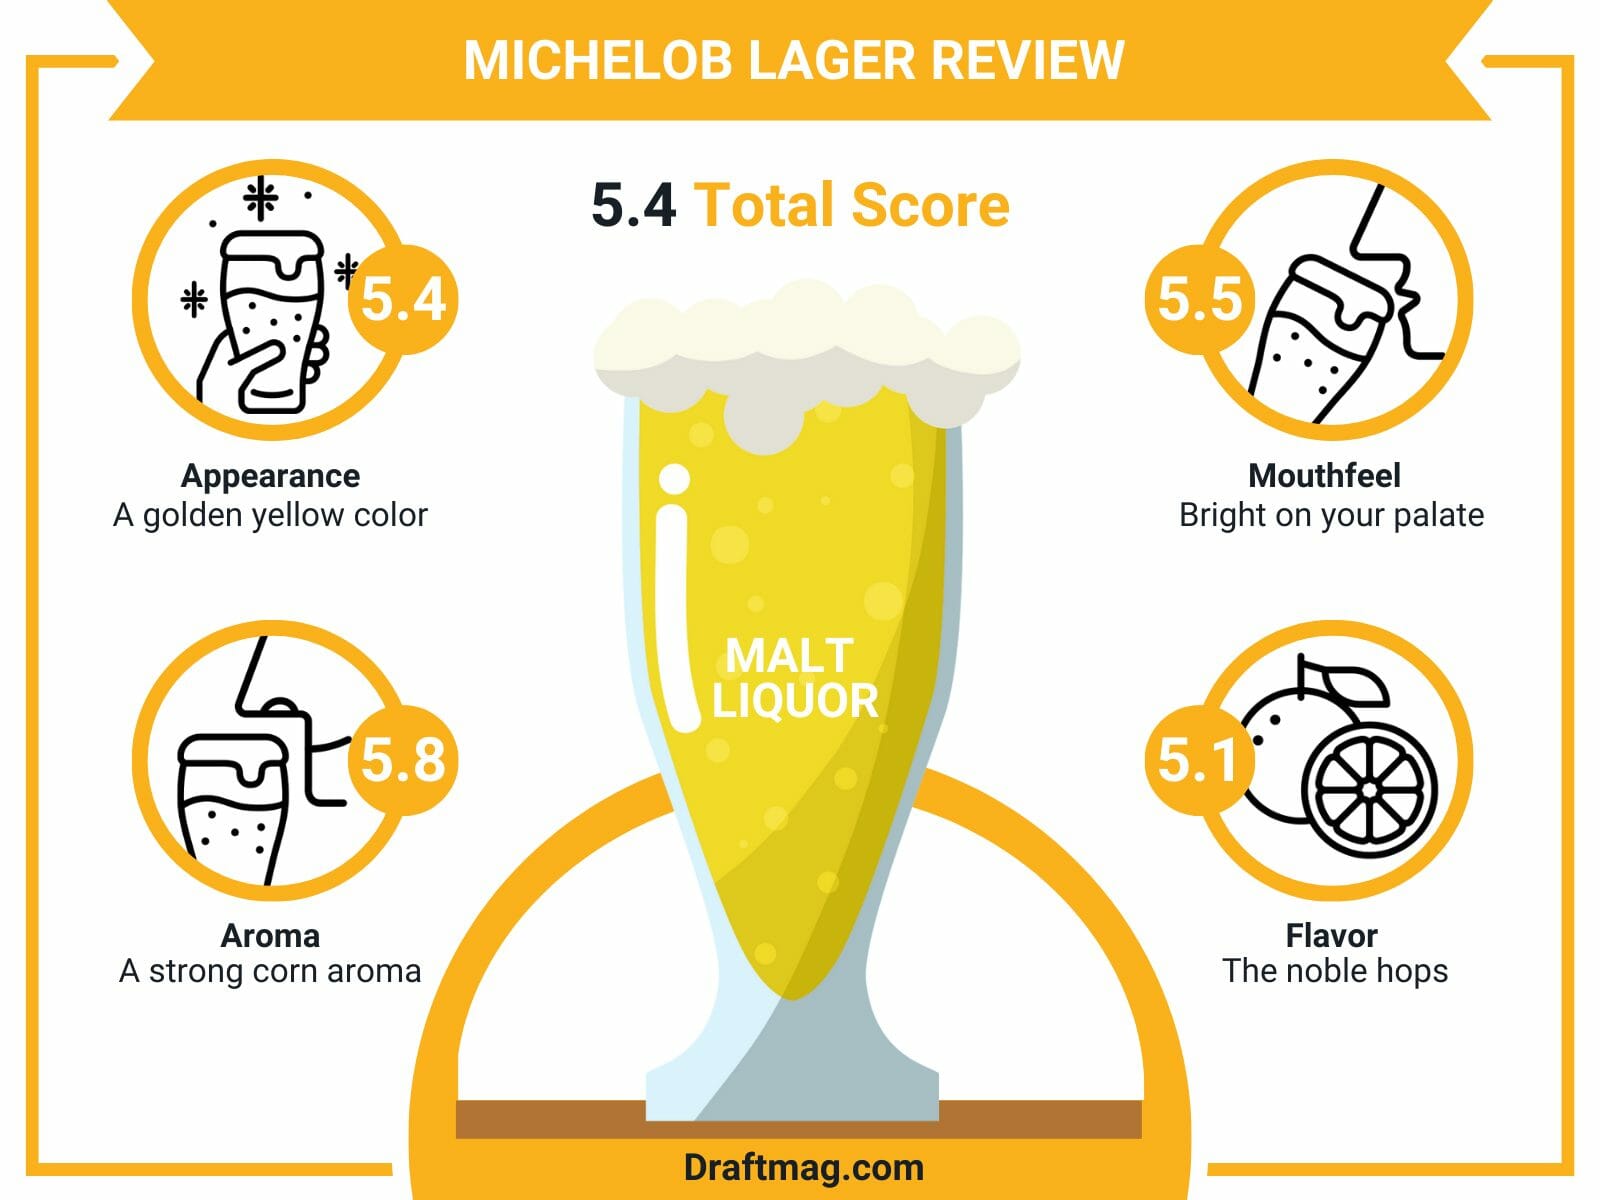 Michelob lager review infographic